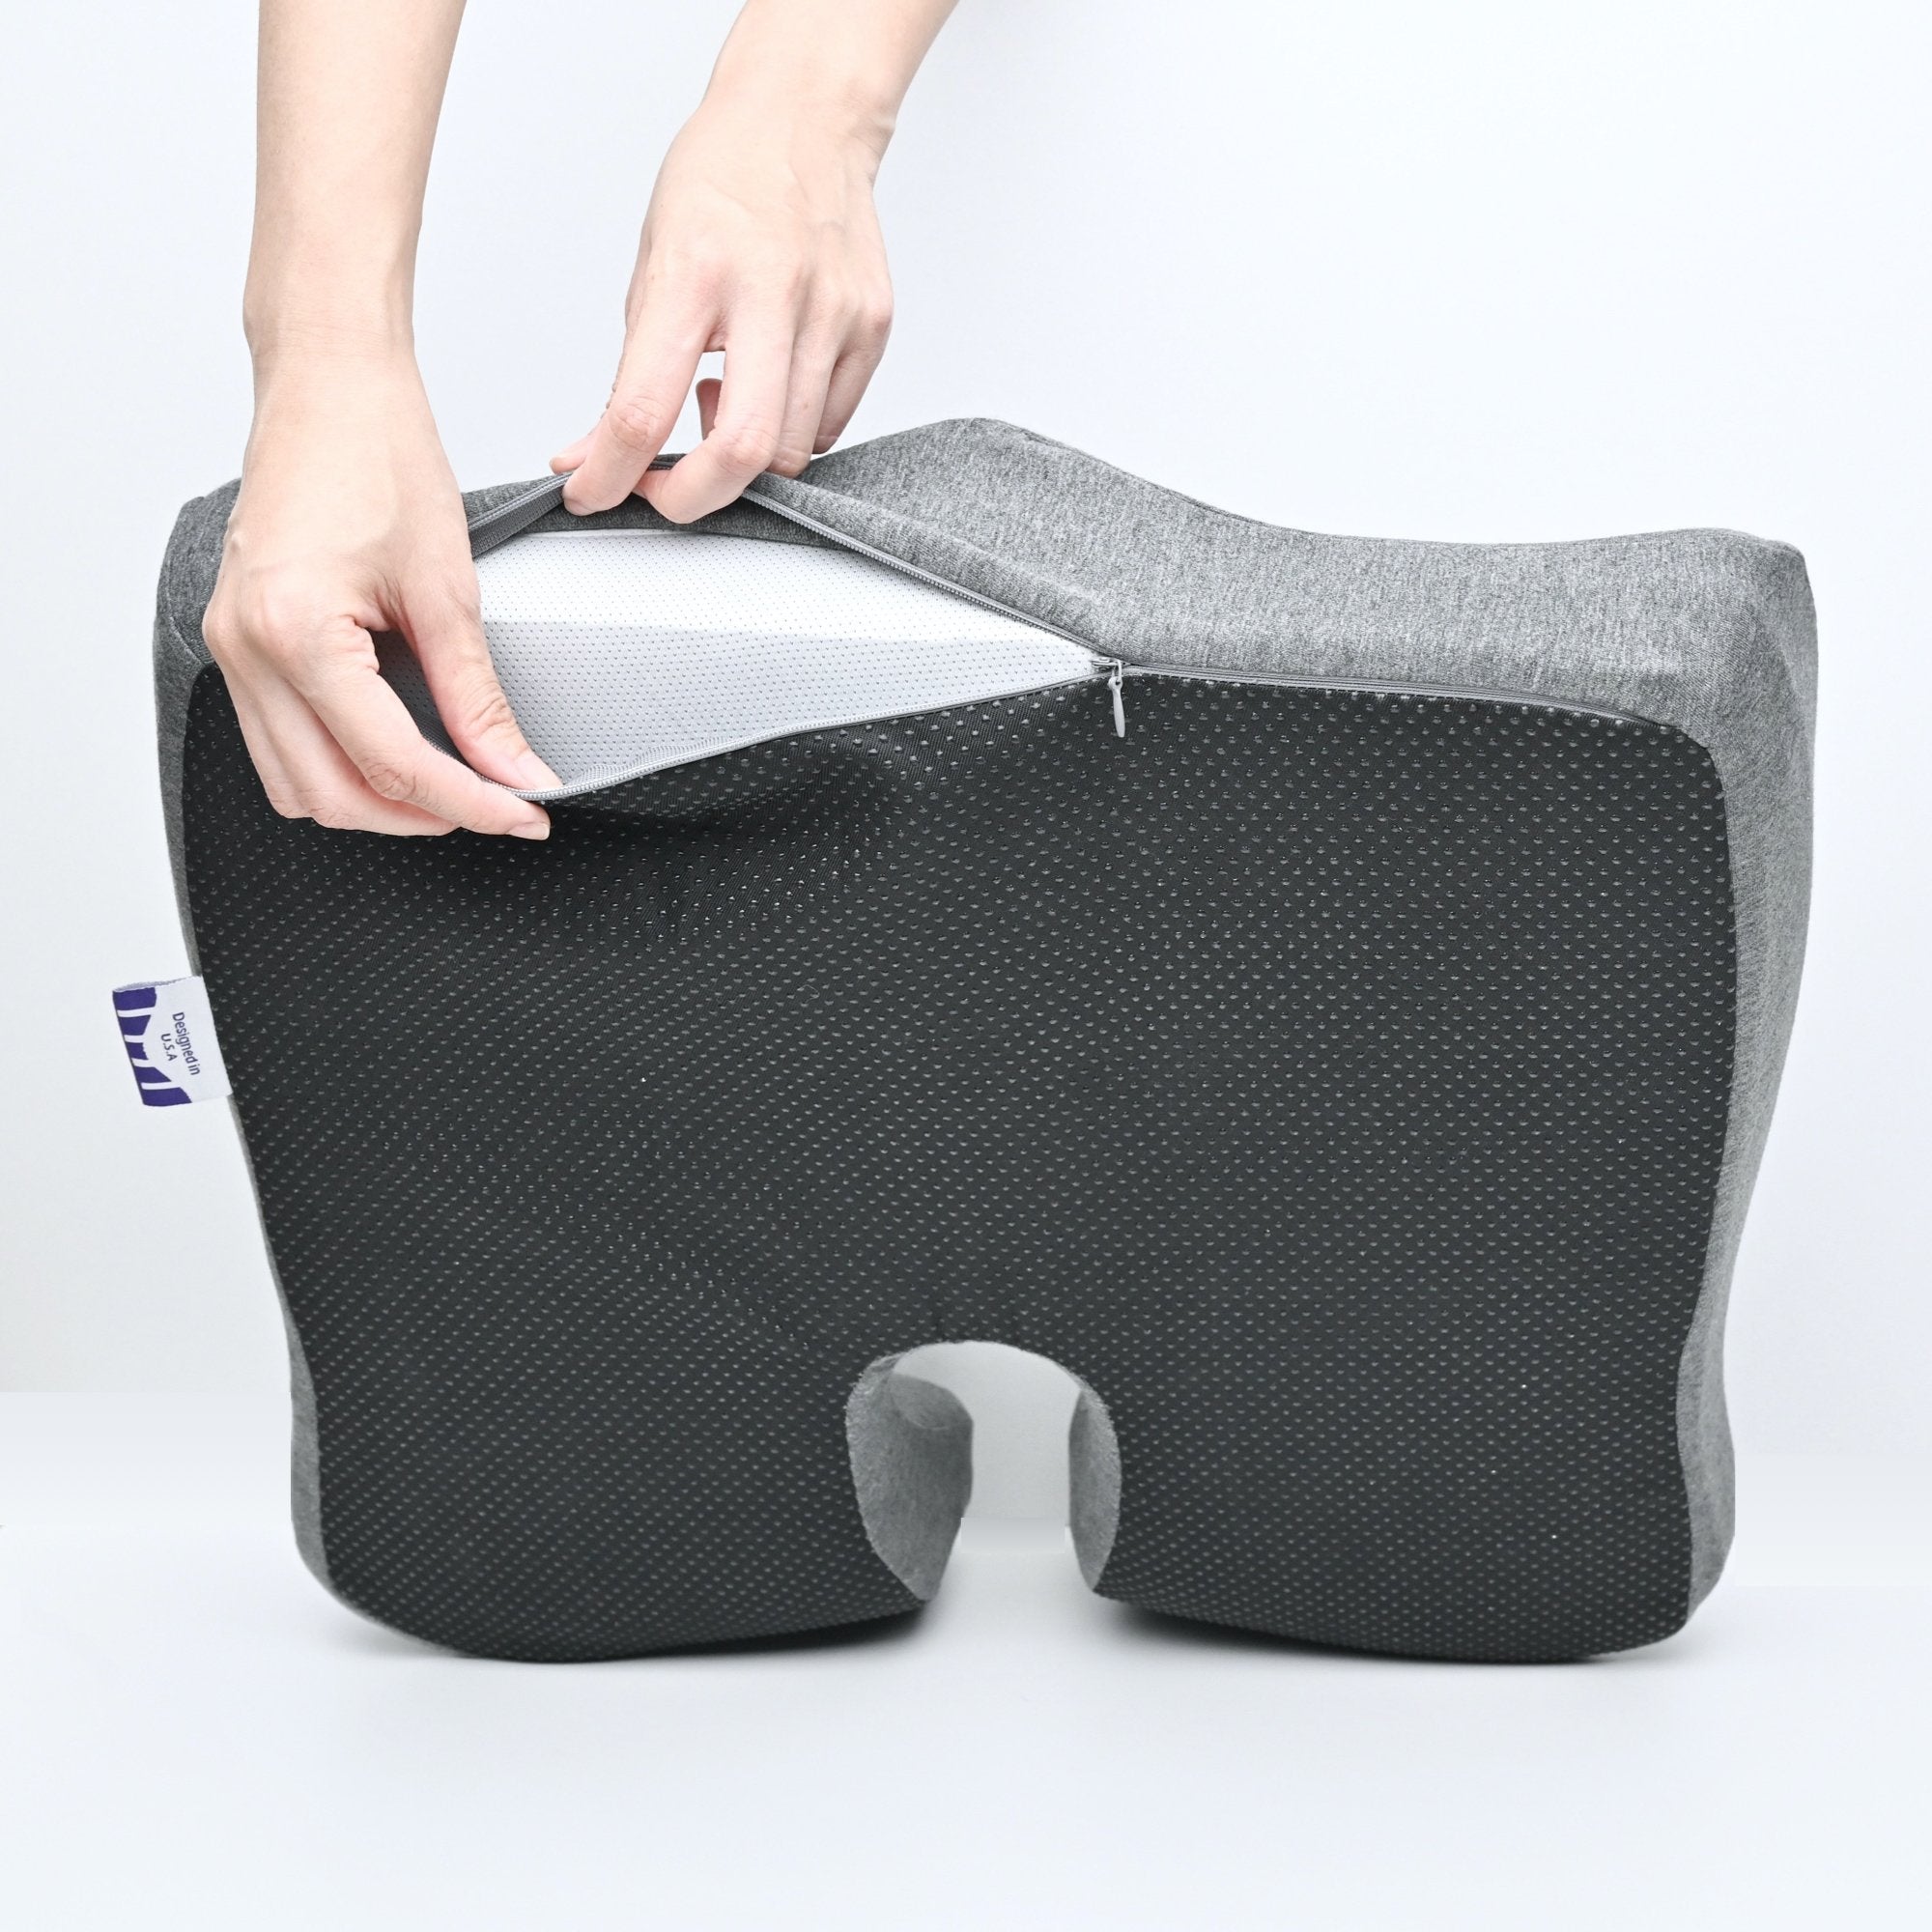  Cushion Lab Patented Pressure Relief Seat Cushion for Long  Sitting Hours on Office/Home Chair, Car, Wheelchair - Extra-Dense Memory  Foam for Hip, Tailbone, Coccyx, Sciatica - Light Grey : Office Products